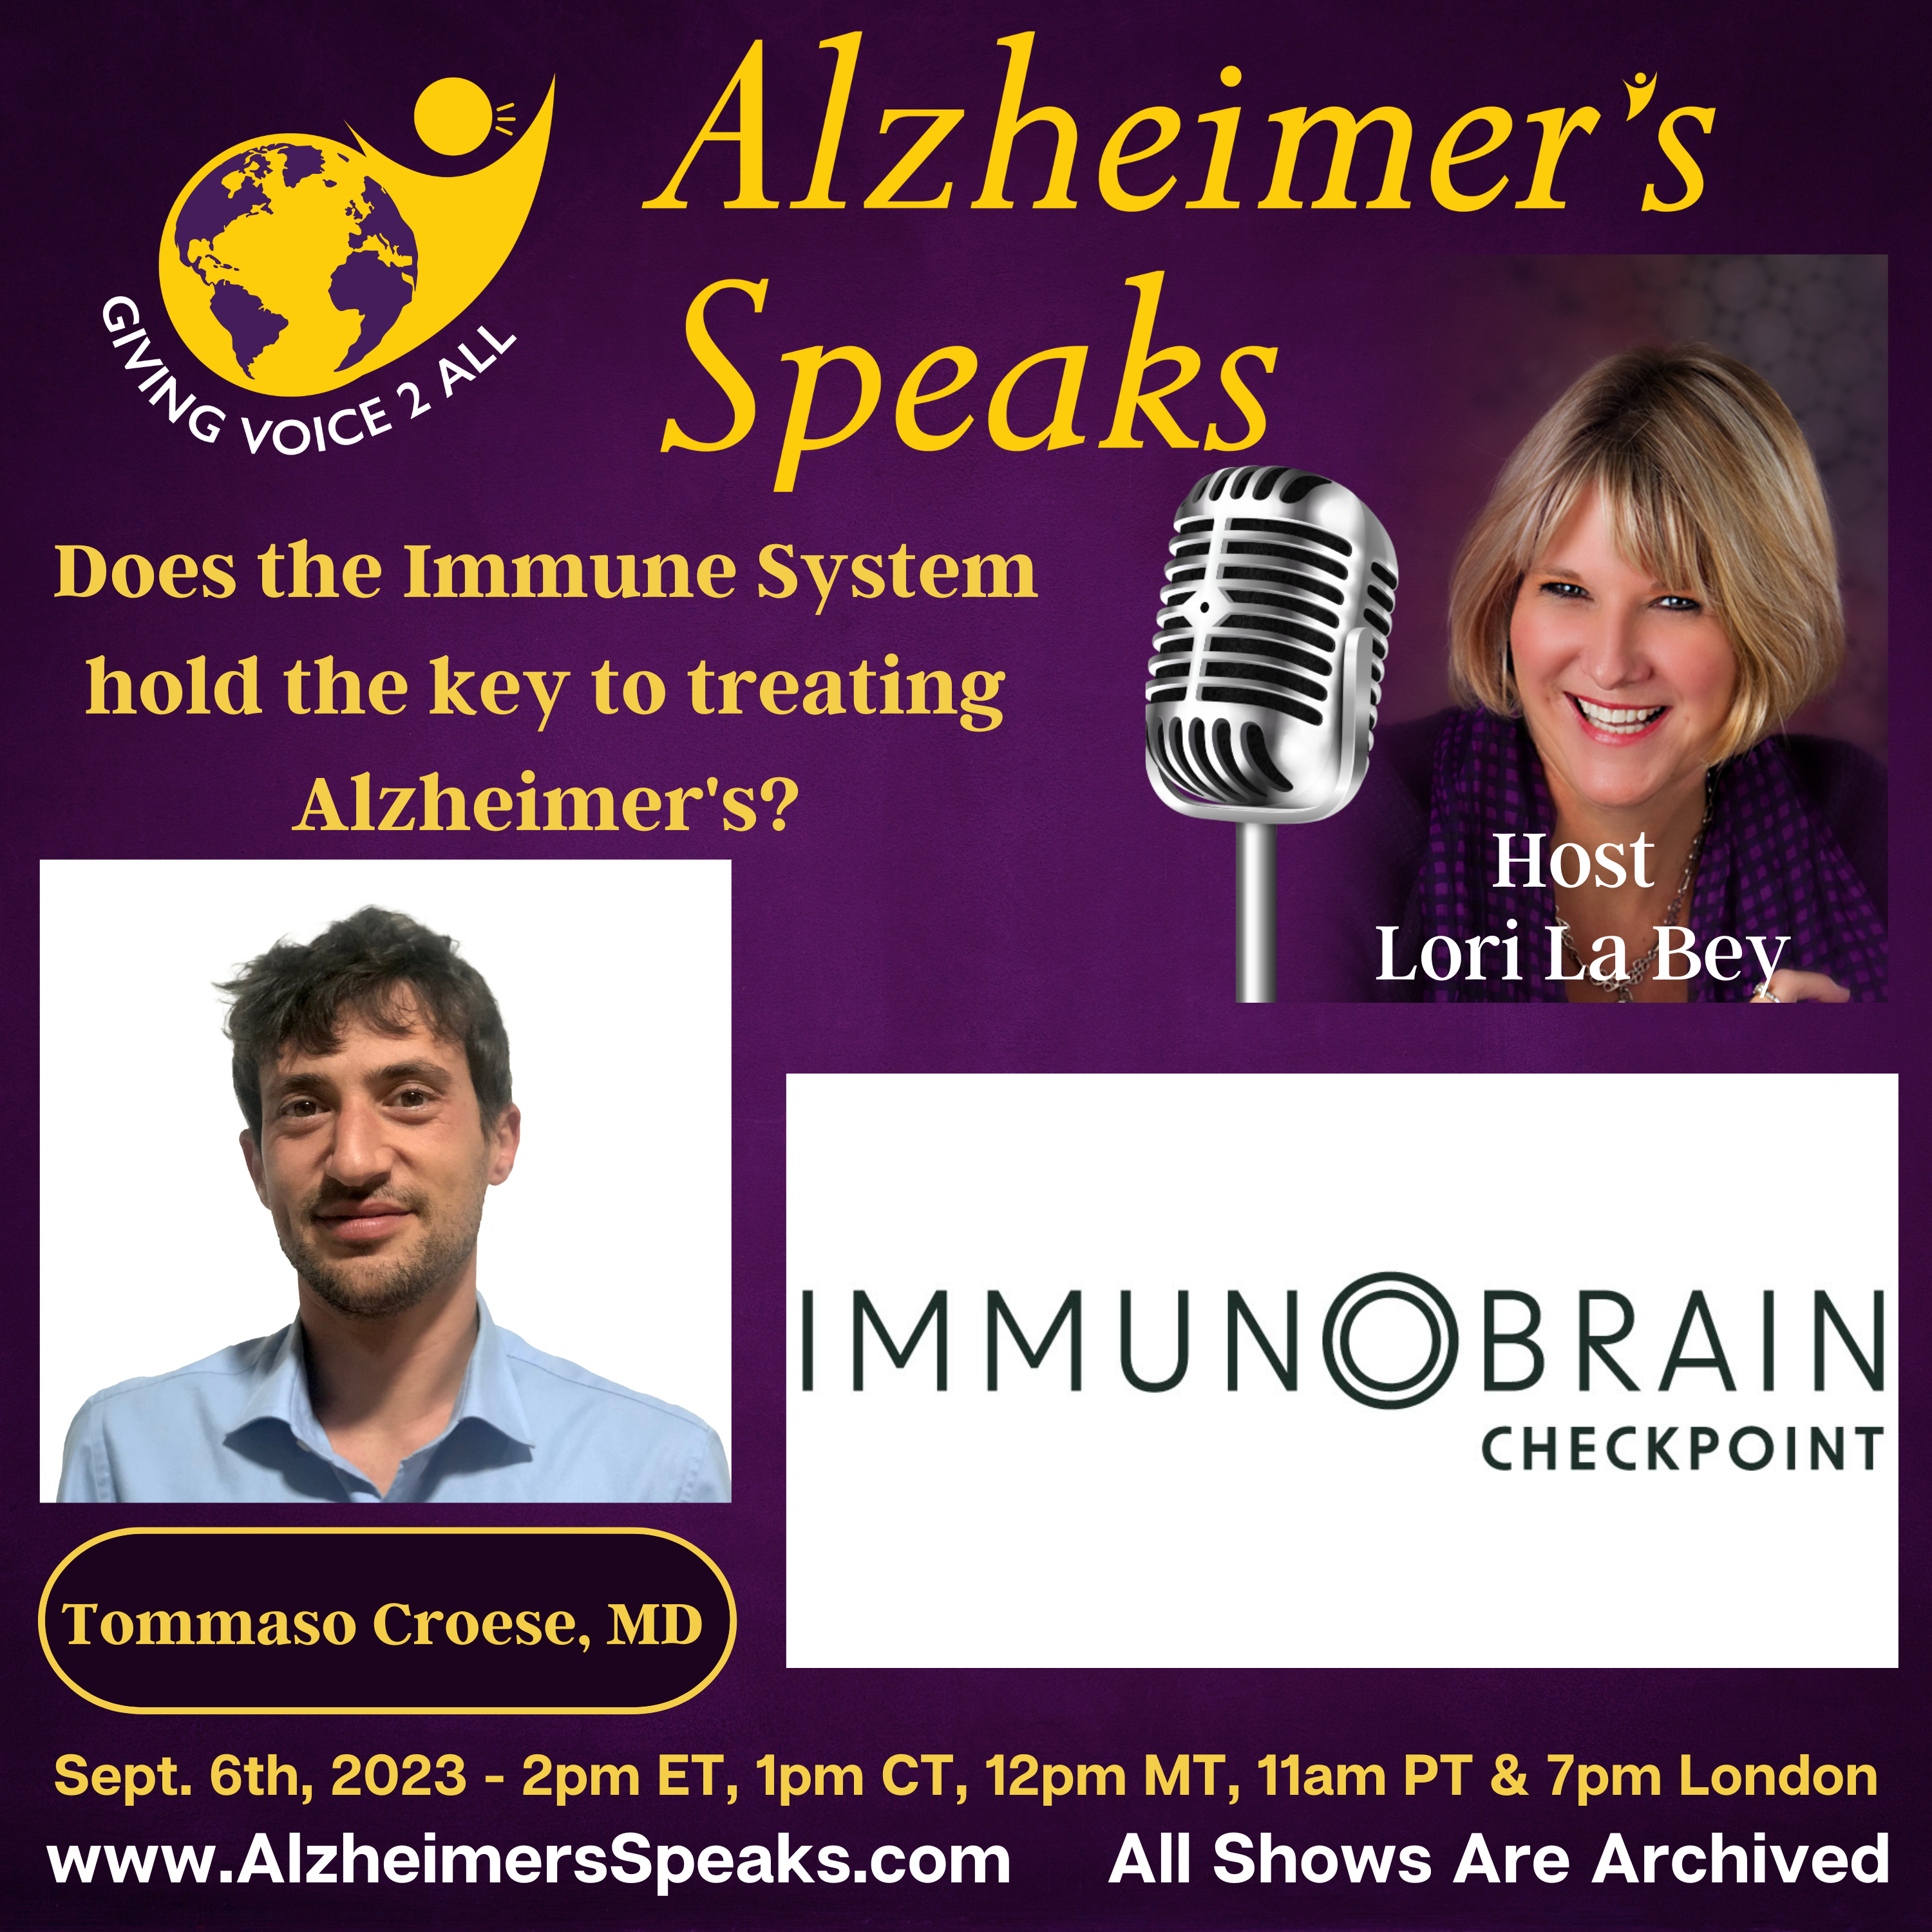 Does the Immune System Hold the Key to Treating Alzheimer’s?